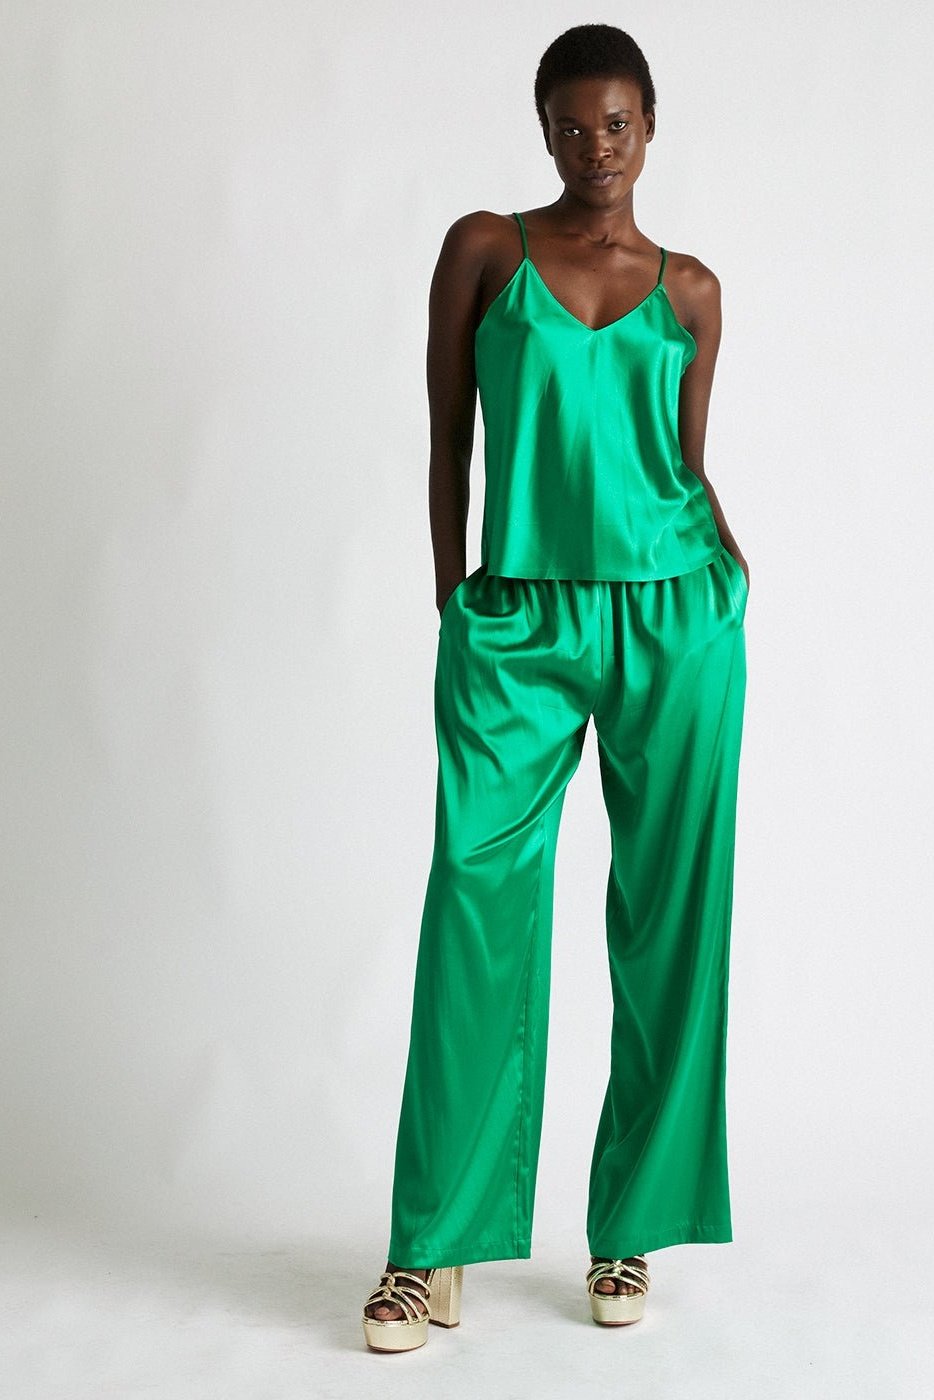 + Beryll Silk Top | Cactus - +Beryll Silk Top | Cactus - +Beryll Worn By Good People